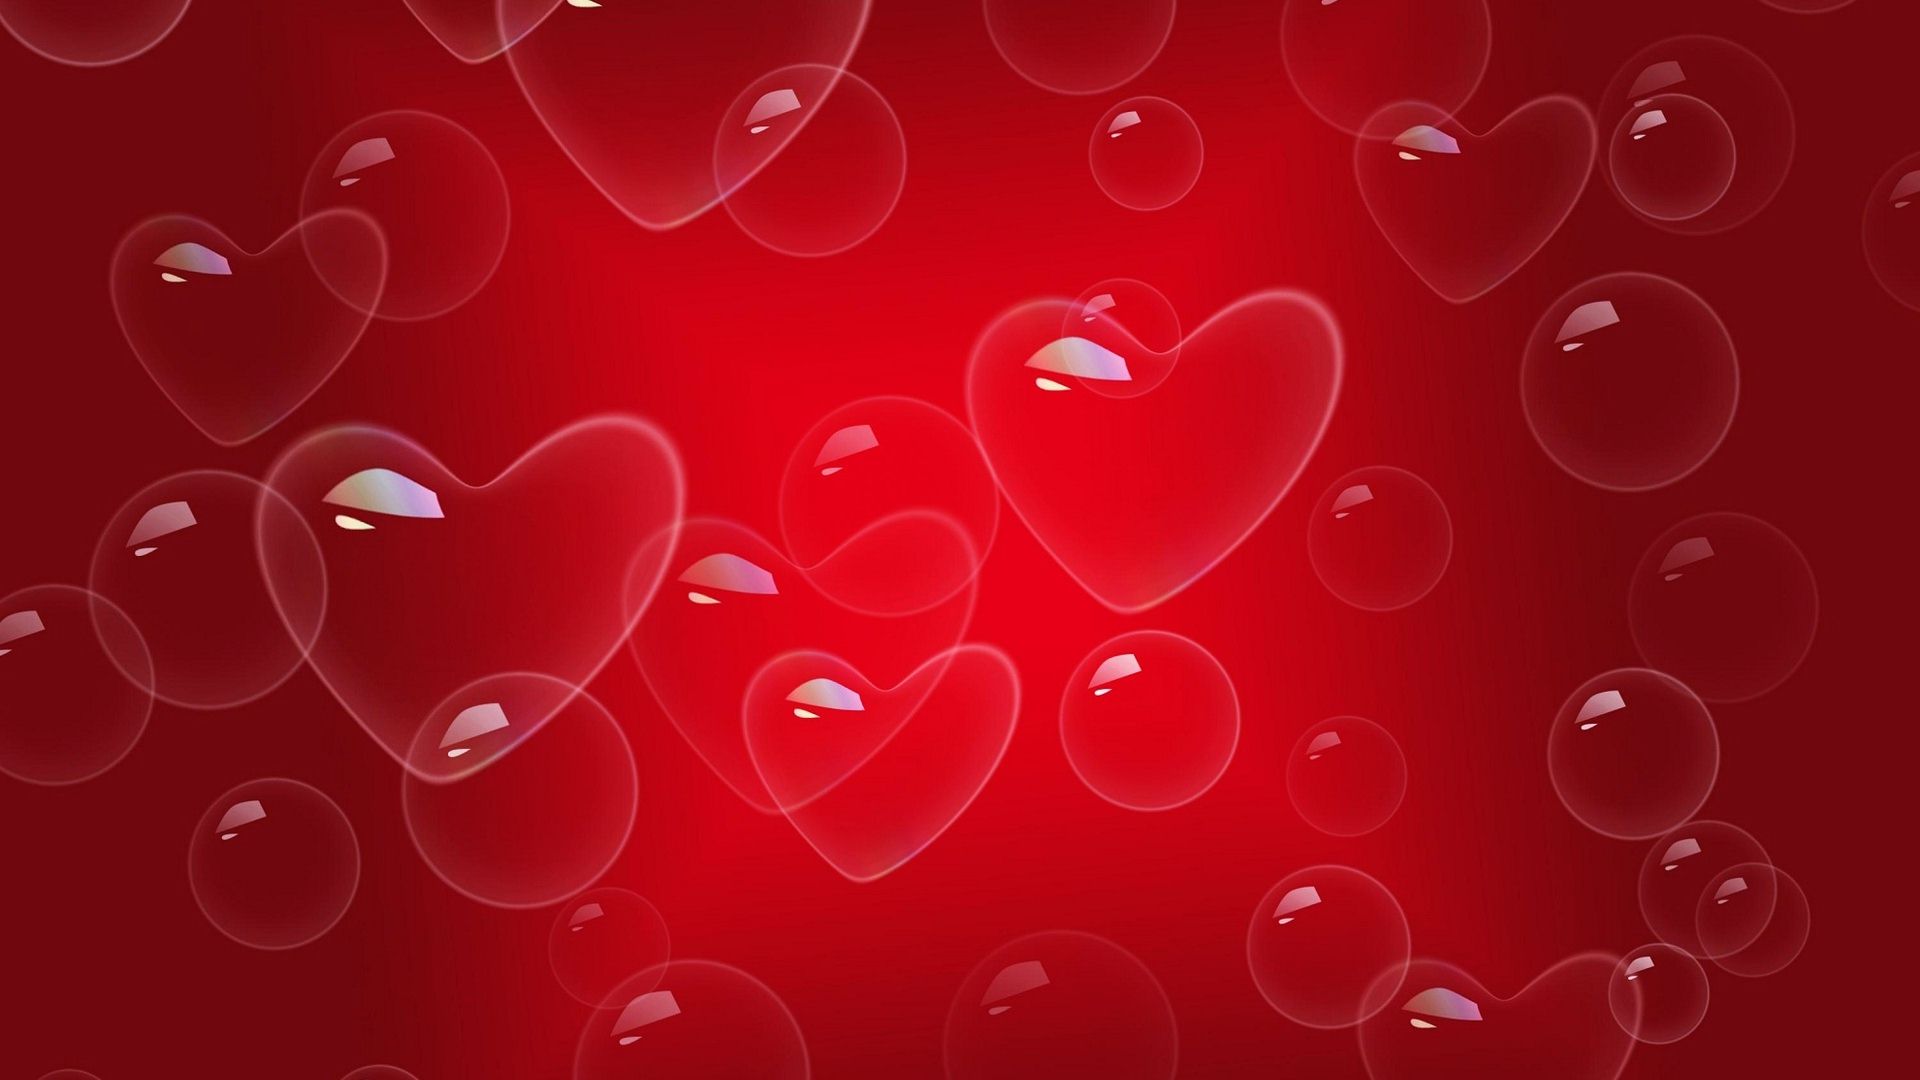 Free download Love Heart Bubbles Red Background Wallpaper 1920x1080 [1920x1080] for your Desktop, Mobile & Tablet. Explore Red Love Heart Background. Heart Love Wallpaper Image, Hearts Background Wallpaper, Wallpaper Hearts Love